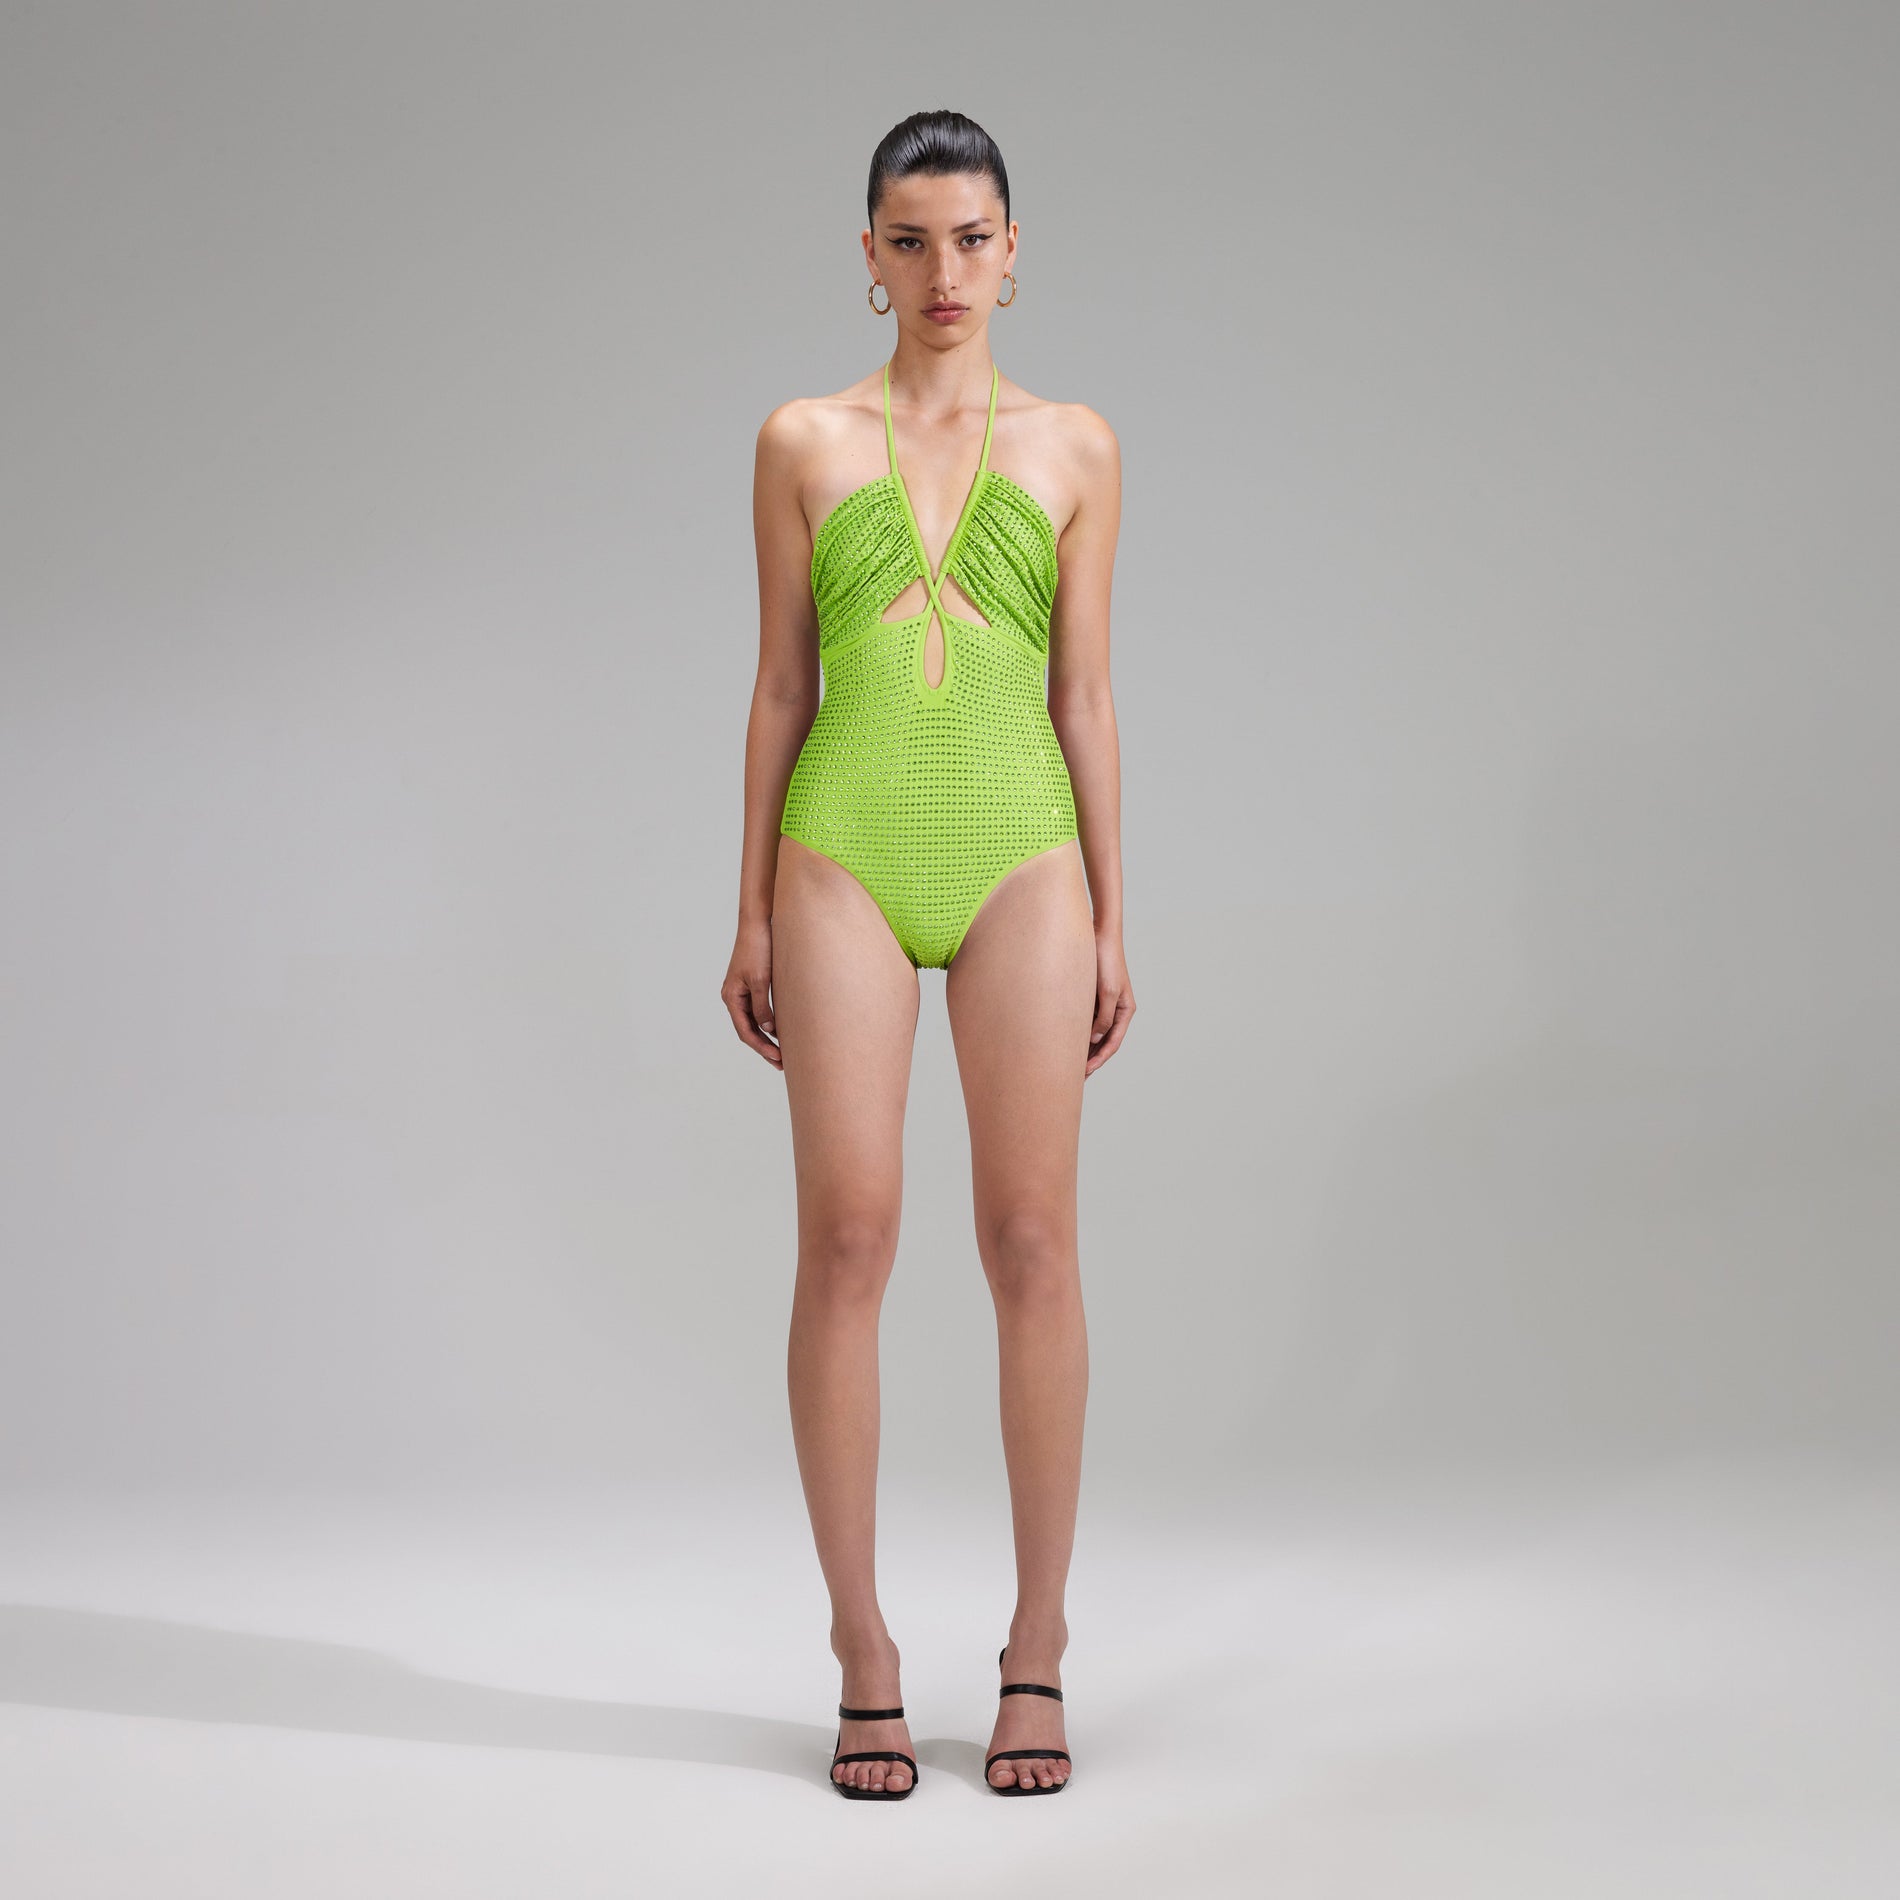 A woman wearing the Green Rhinestone Strappy Swimsuit